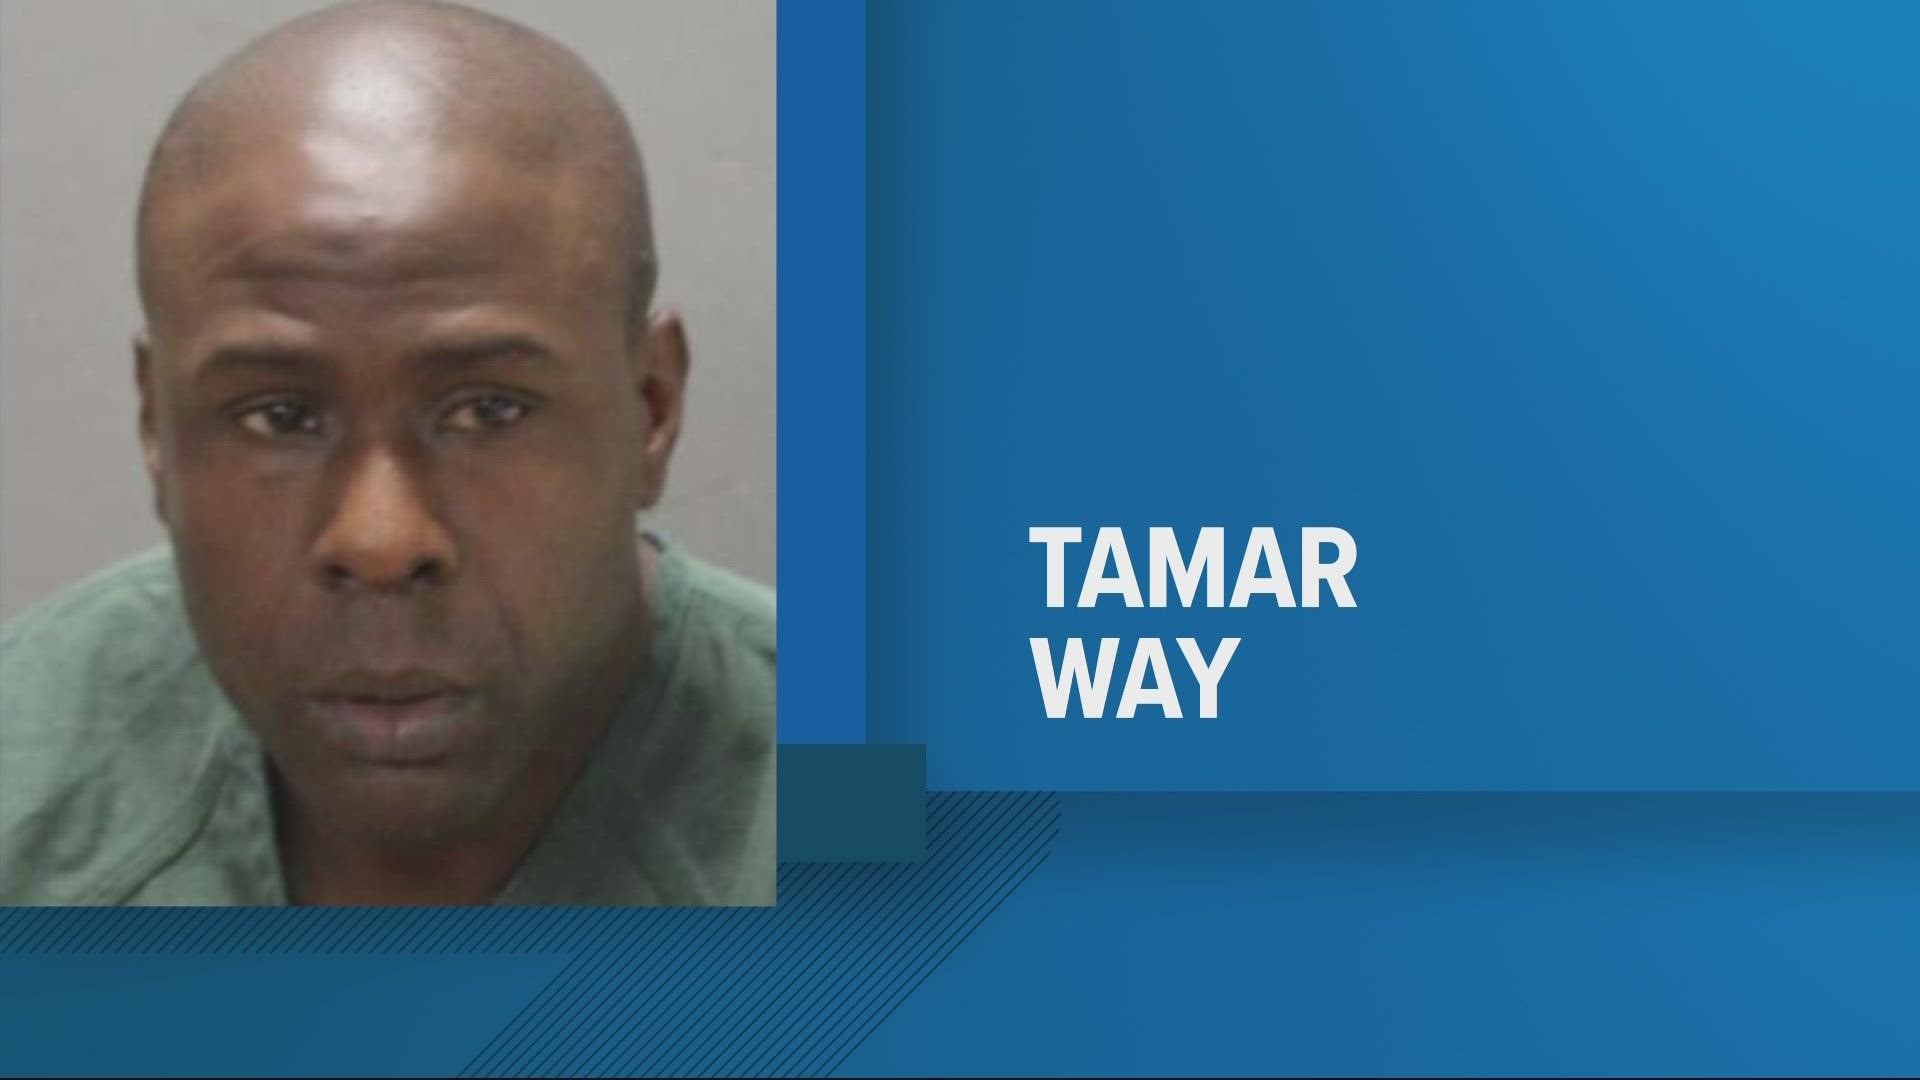 Police say Tamar Way, 39, was charged in connection to the crime that occurred Feb. 17 in the 5200 block of Roanoke Blvd.